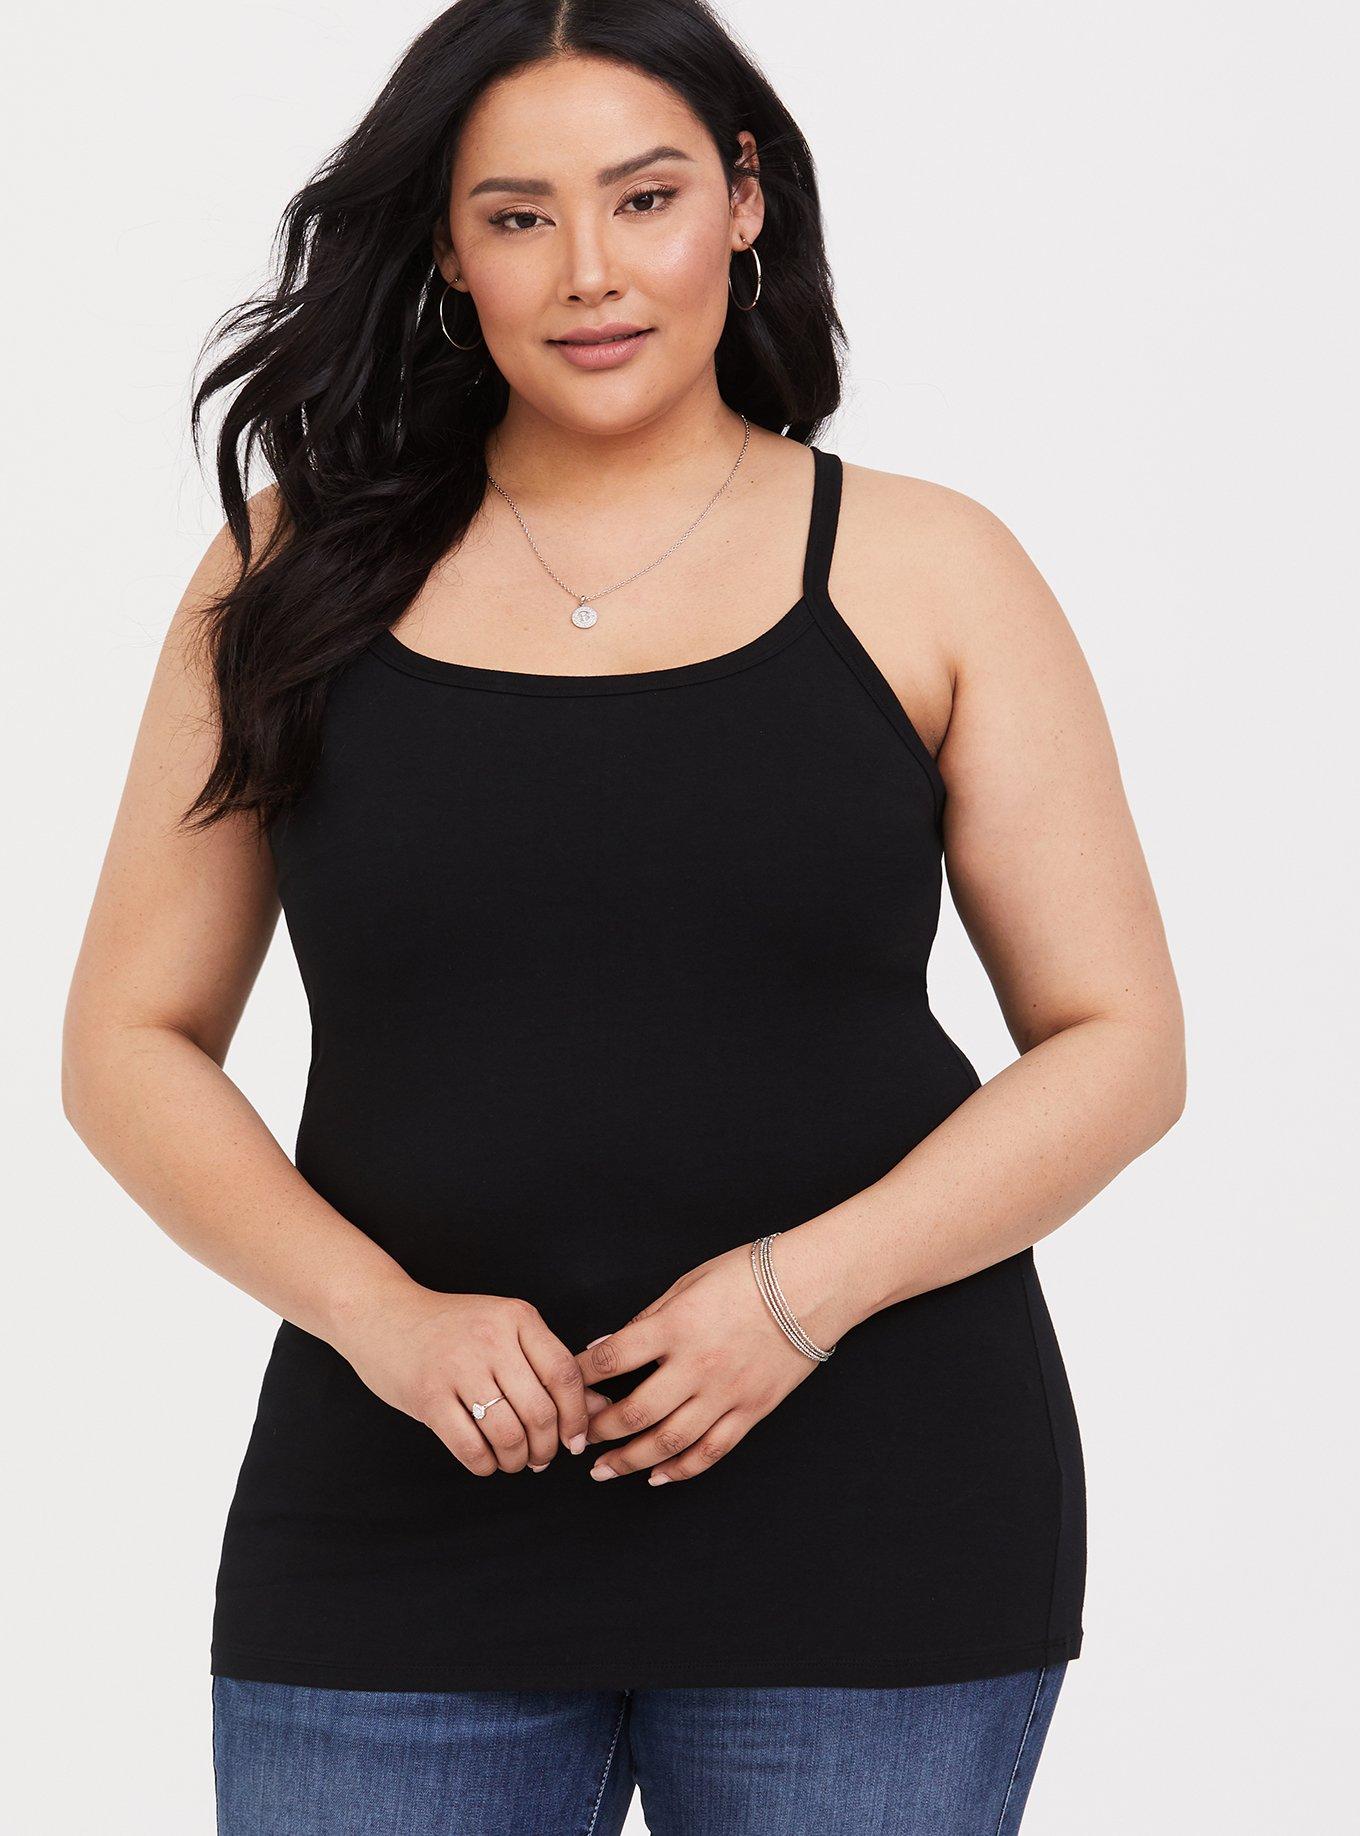 Buy SHAPERX Women's Organic Cotton Camisole Tank Top with Built-in Shelf  Bra Plus Size Pack of 1 (2XL, Black) at